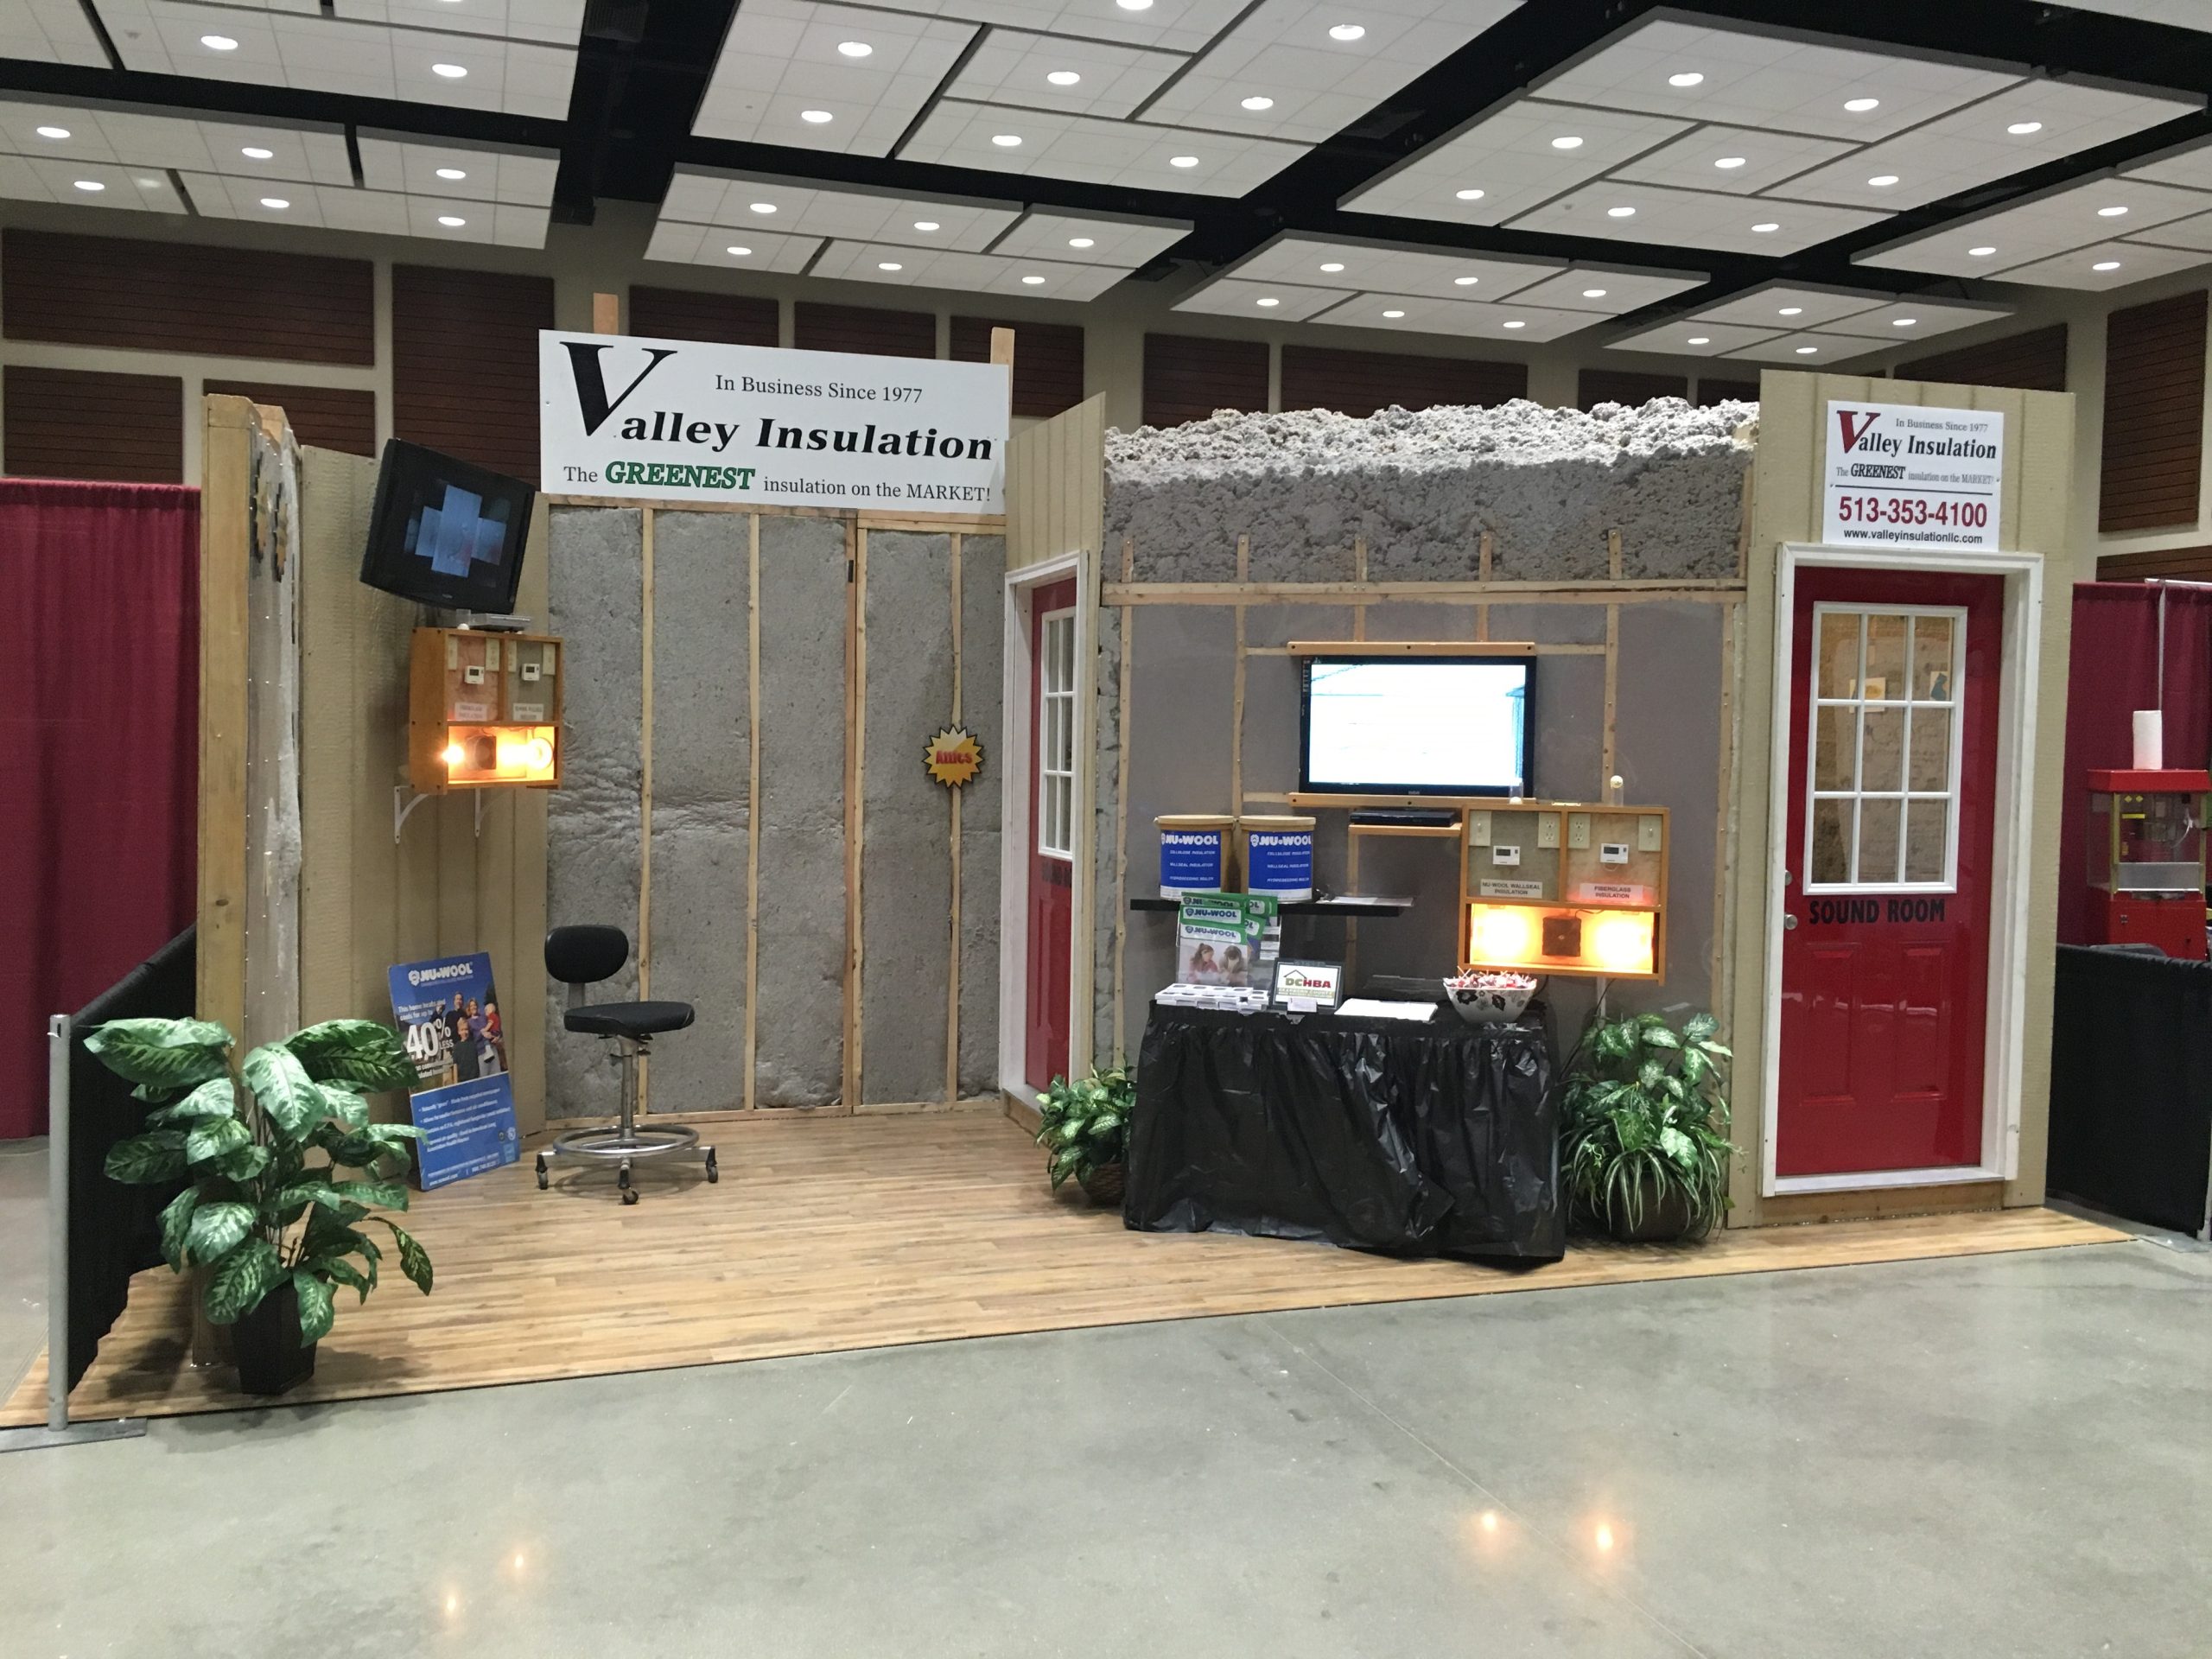 Valley Insulation Booth at an Industry Showcase Event for home builders